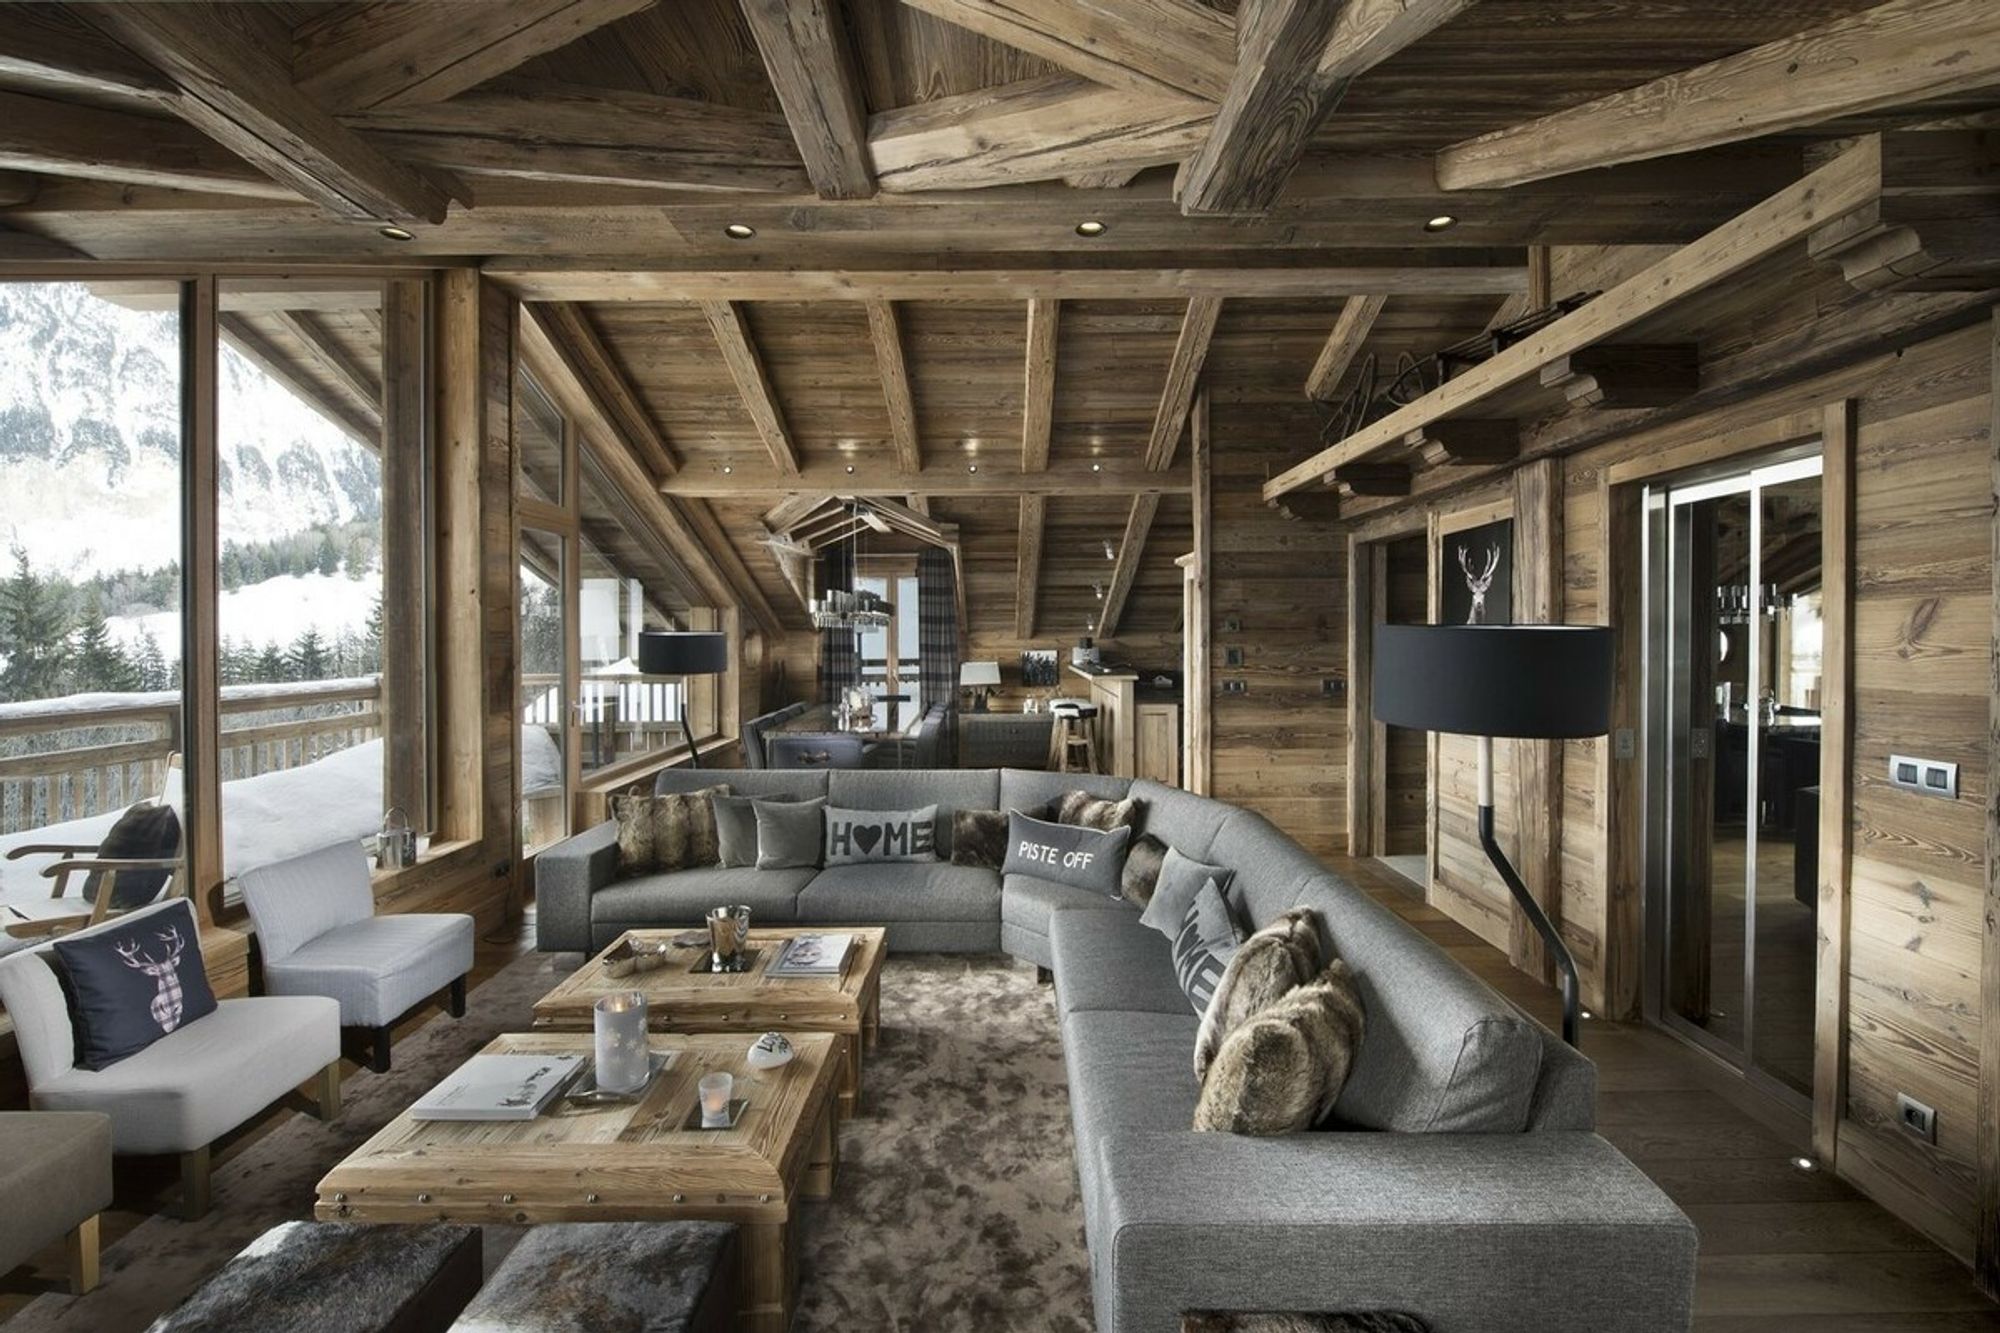 What to Expect at The Luxury Catered Chalet Courchevel